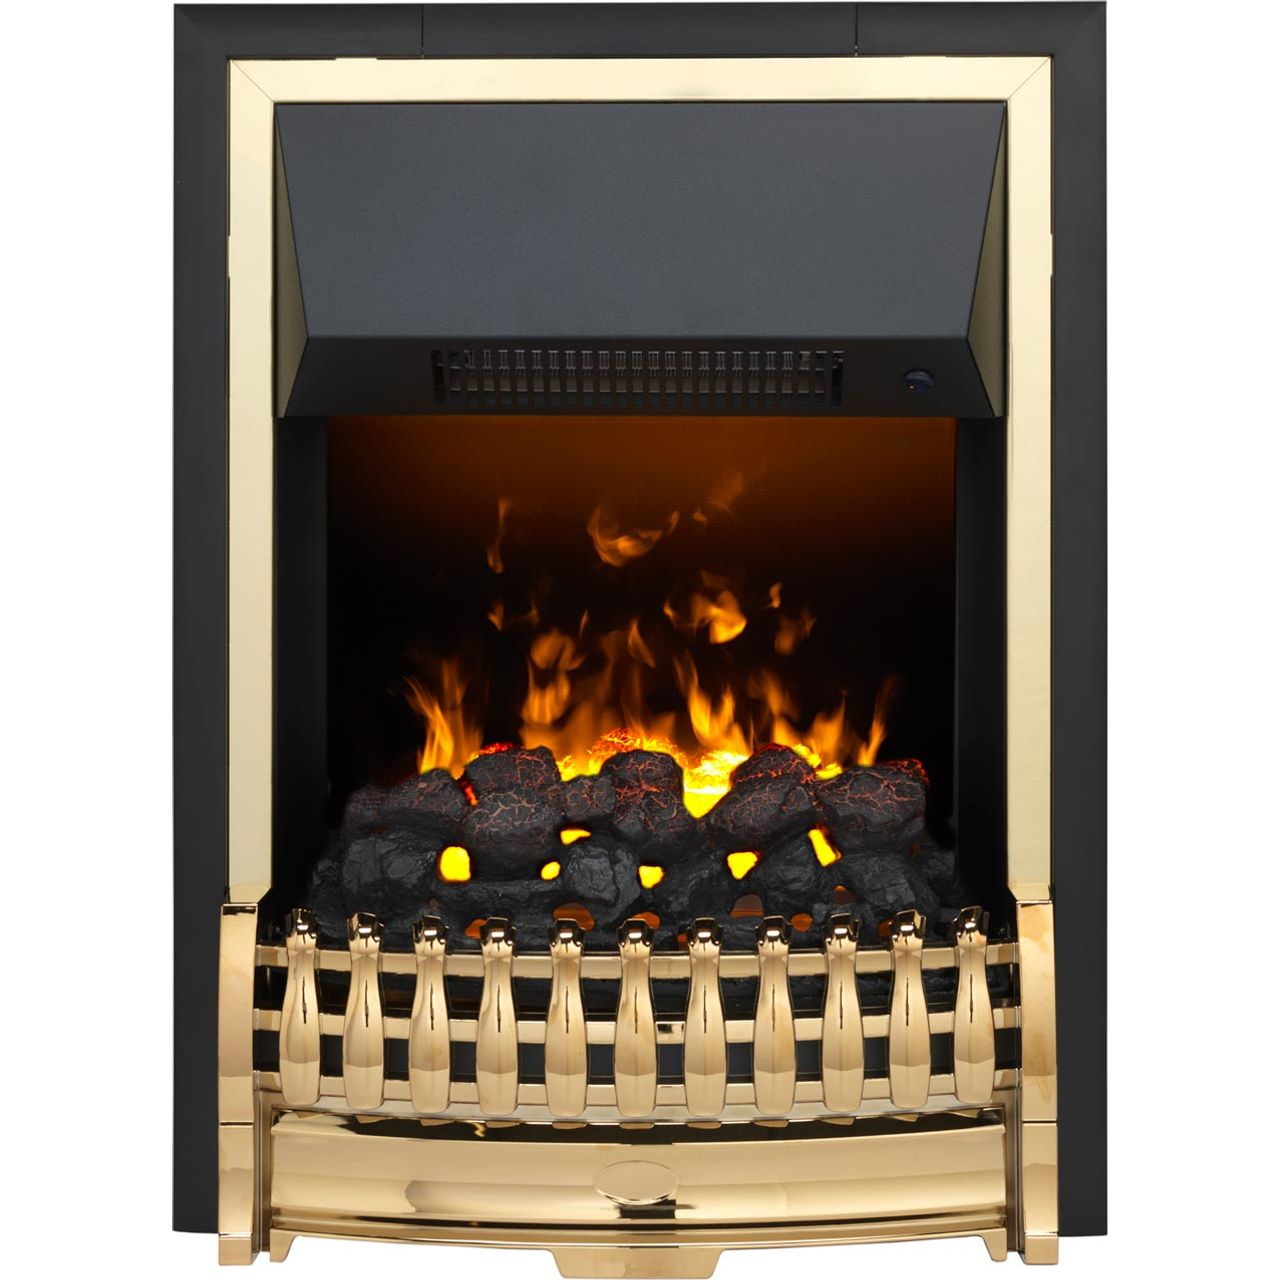 Dimplex Atherton ATH20 Coal Bed Inset Fire With Remote Control Review